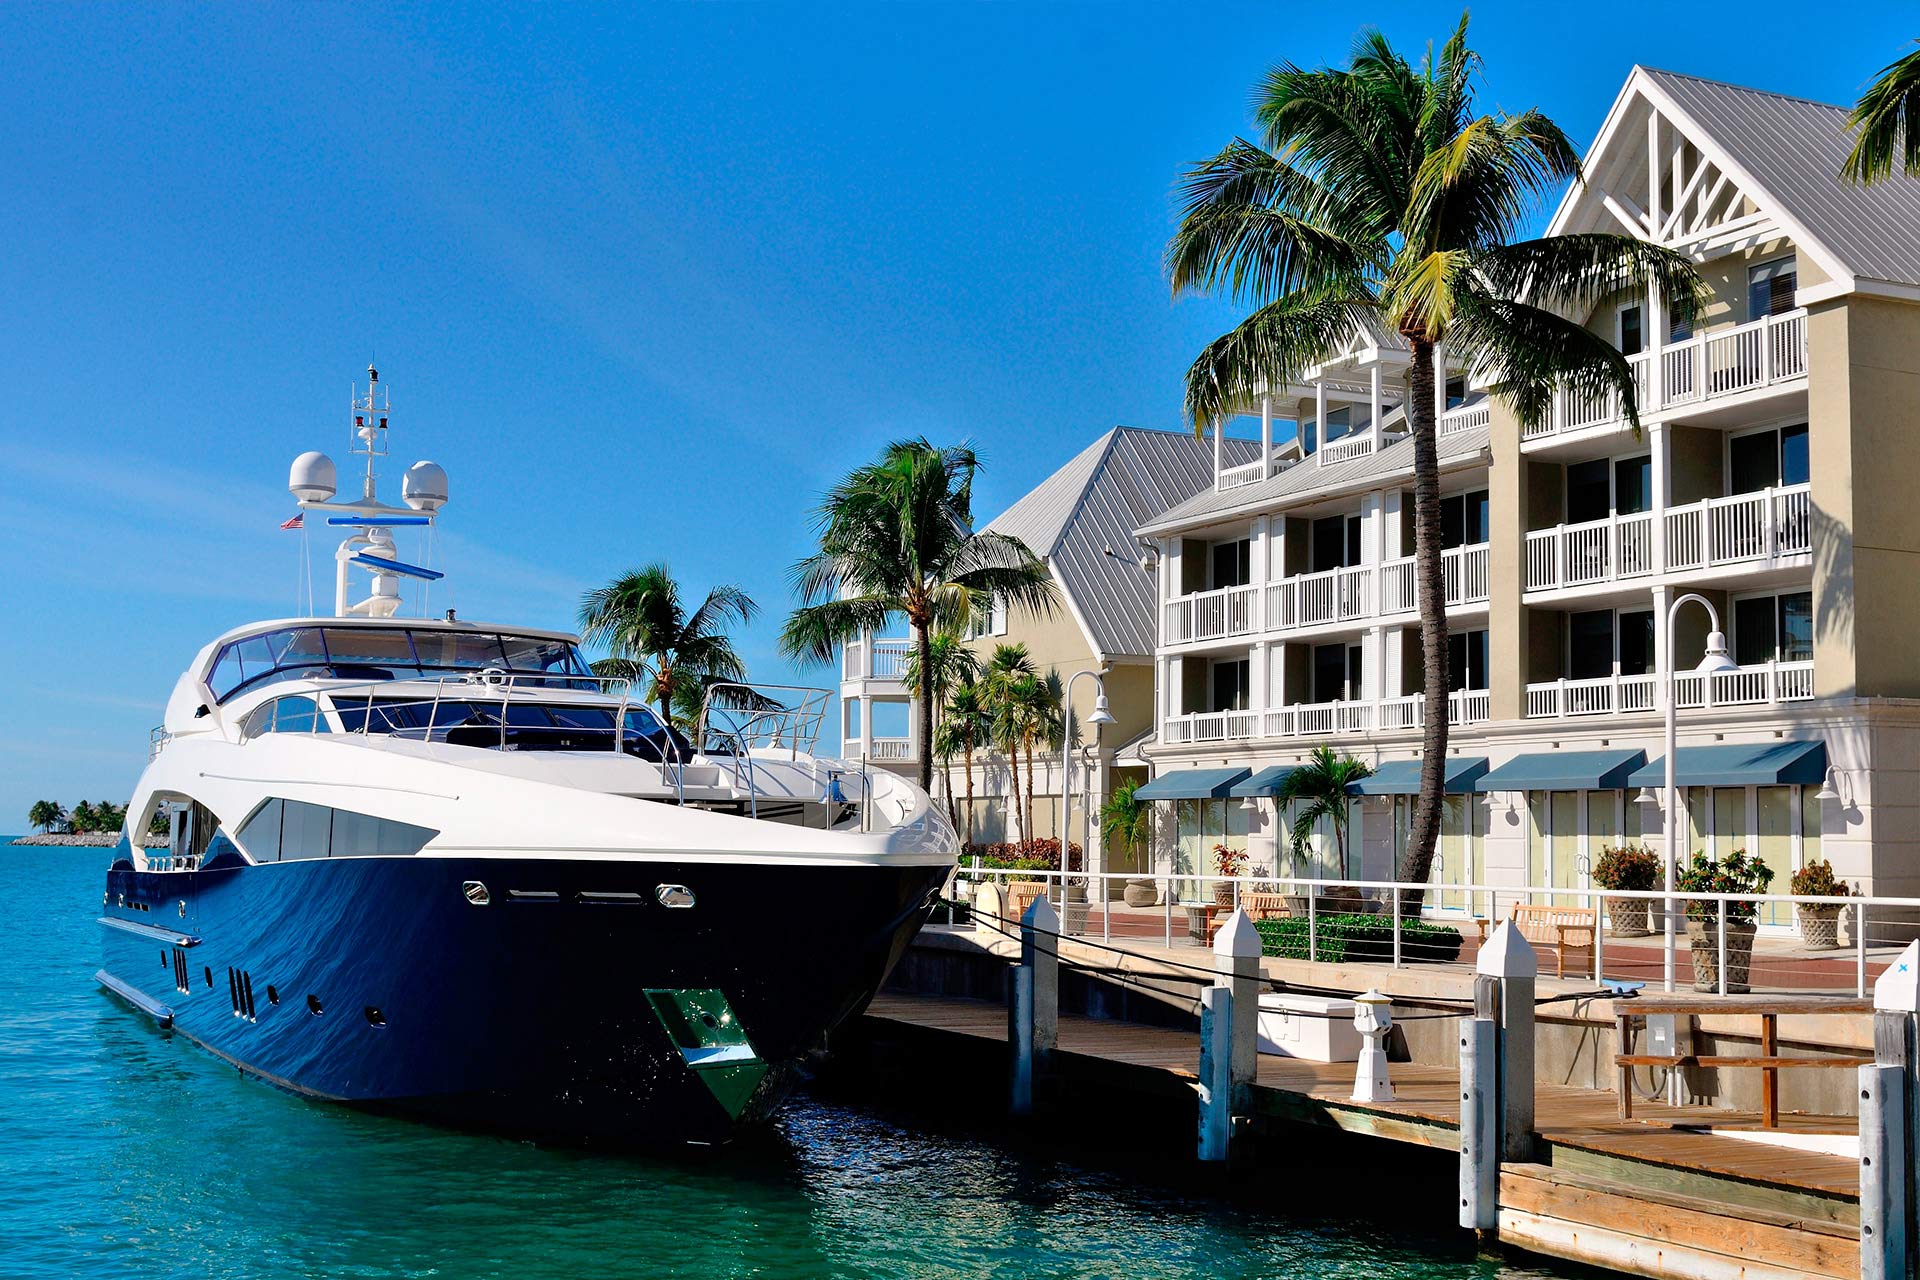 rent a yacht in florida keys